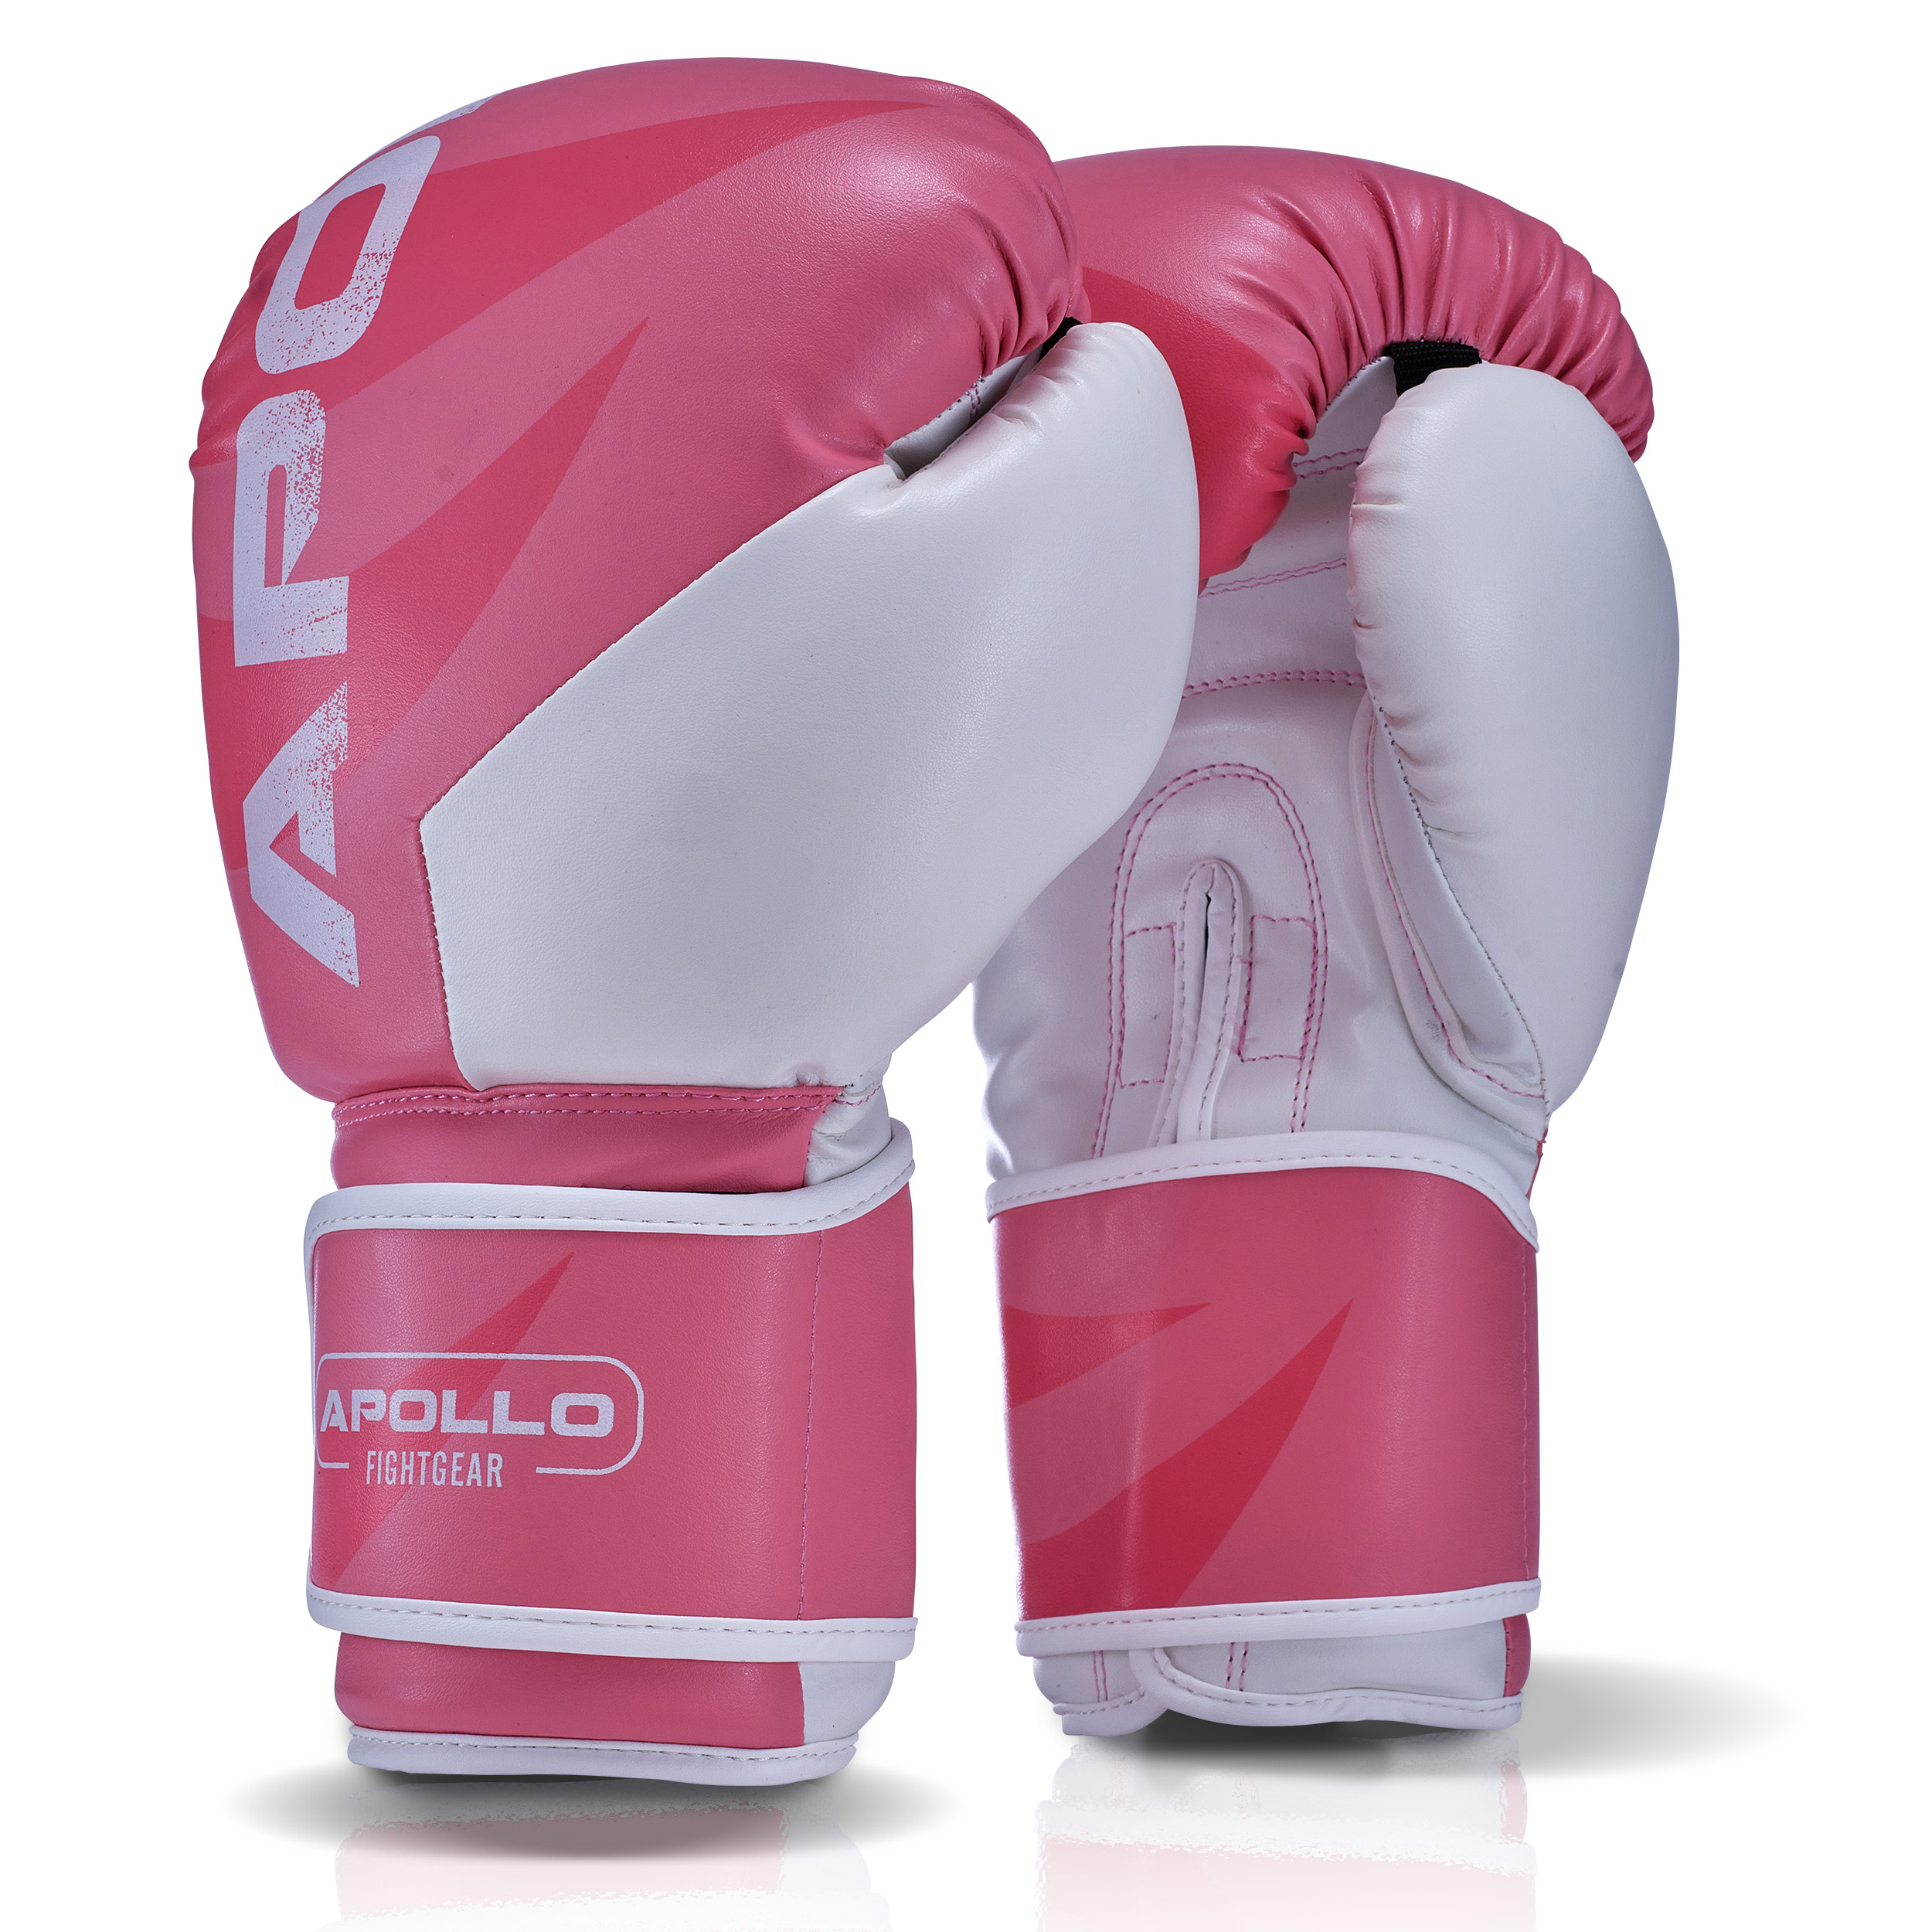 Apollo Boxhandschuh Champion Pink Weiss 14oz